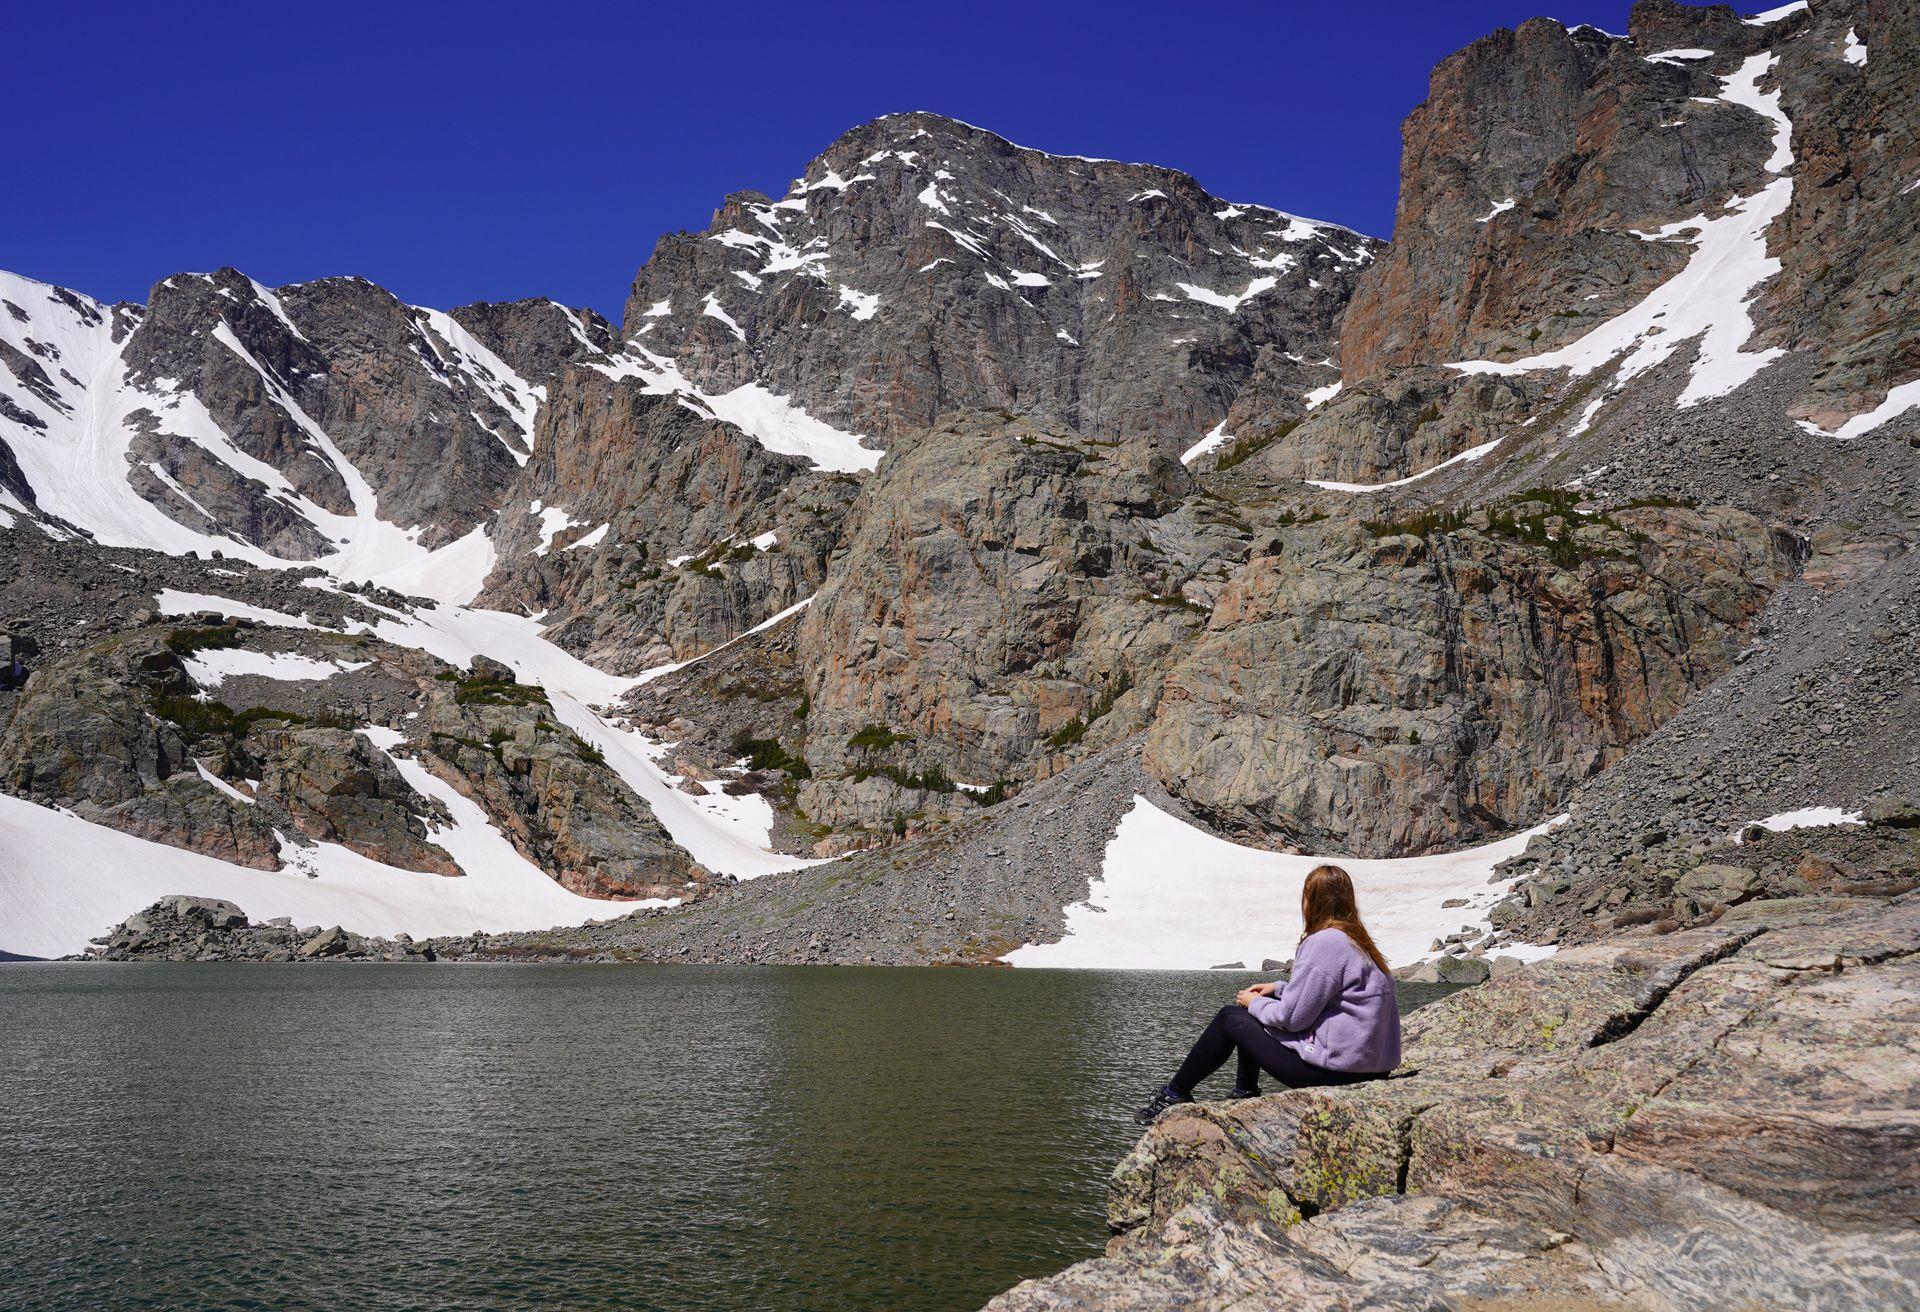 Lydia sitting next to Sky Pond. There are various drifts of snow along the mountainside.